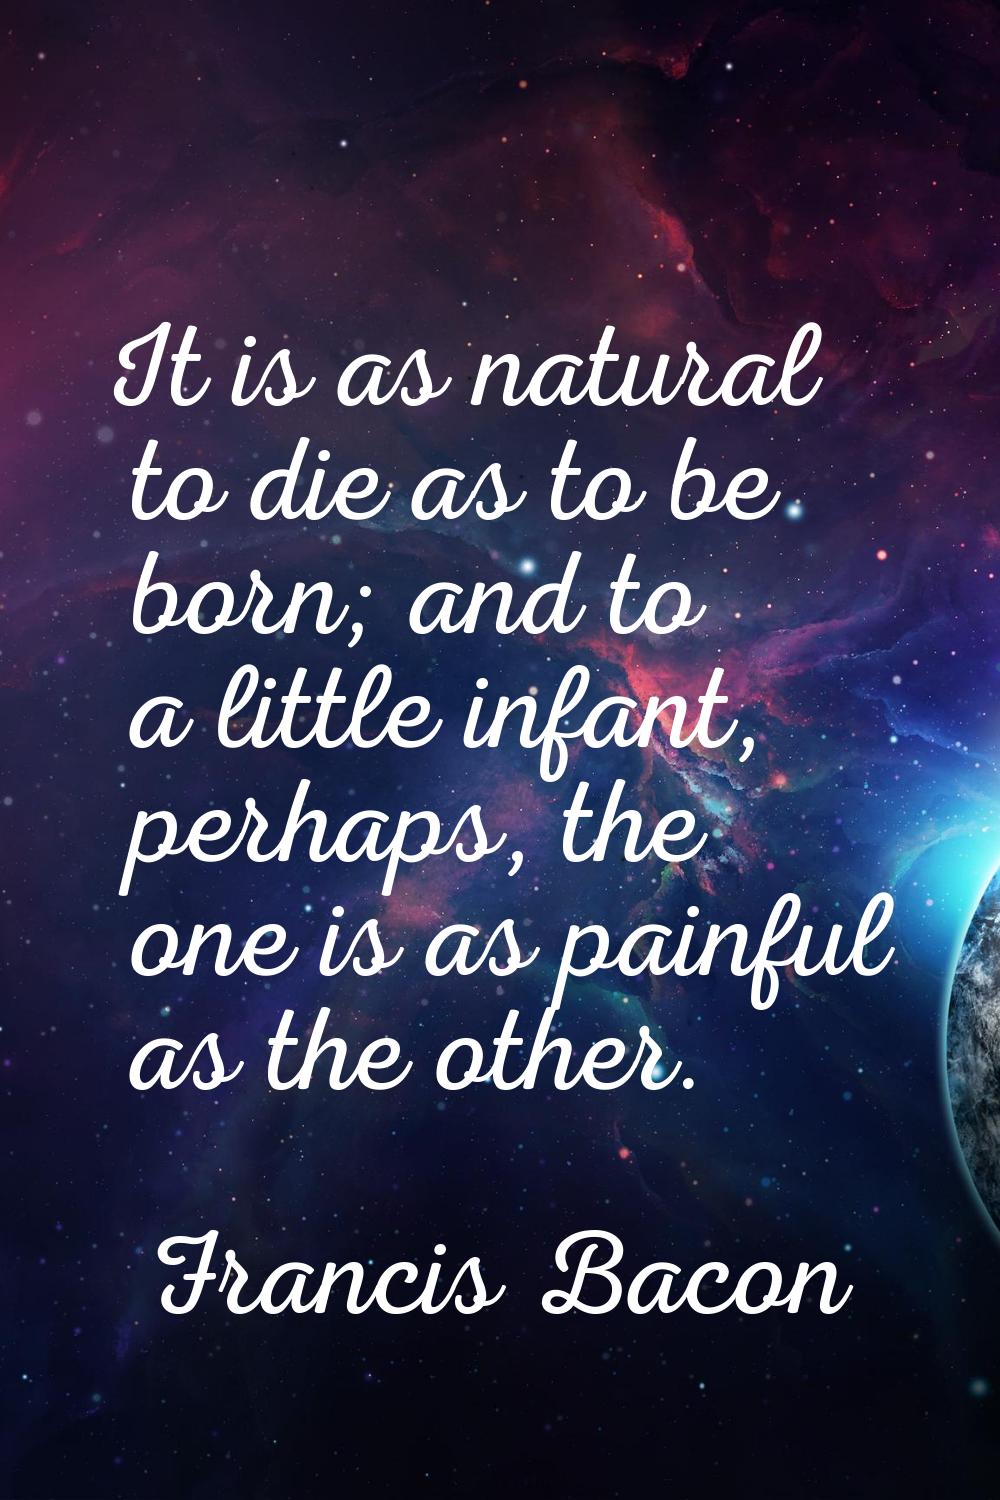 It is as natural to die as to be born; and to a little infant, perhaps, the one is as painful as th